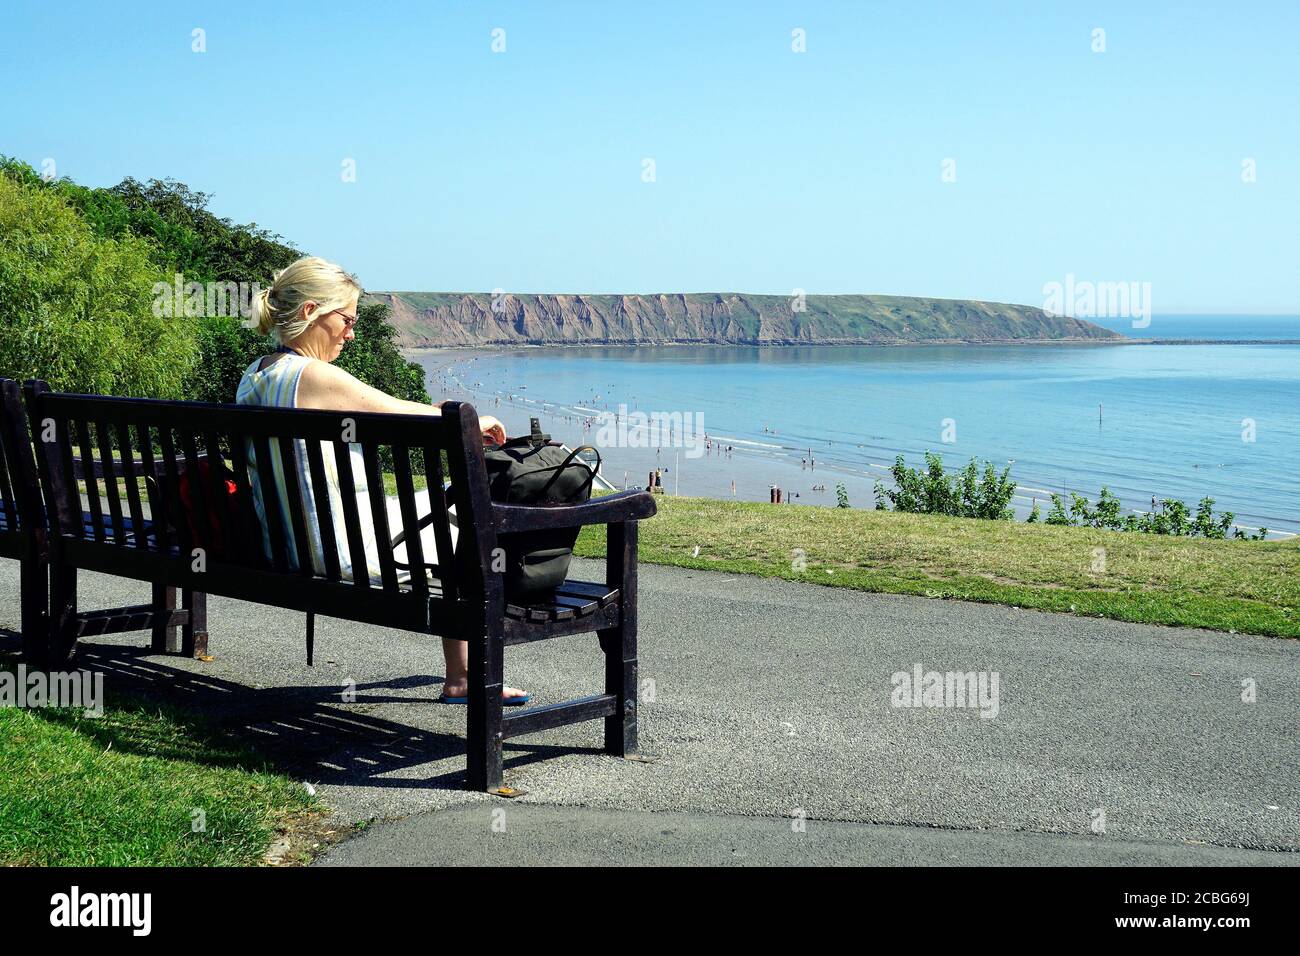 Filey, Yorkshire, UK.August 07, 2020.  Young lady relaxing on a seat at Crescent gardens overlooking the beach and bay at Filey in Yorkshire, UK. Stock Photo